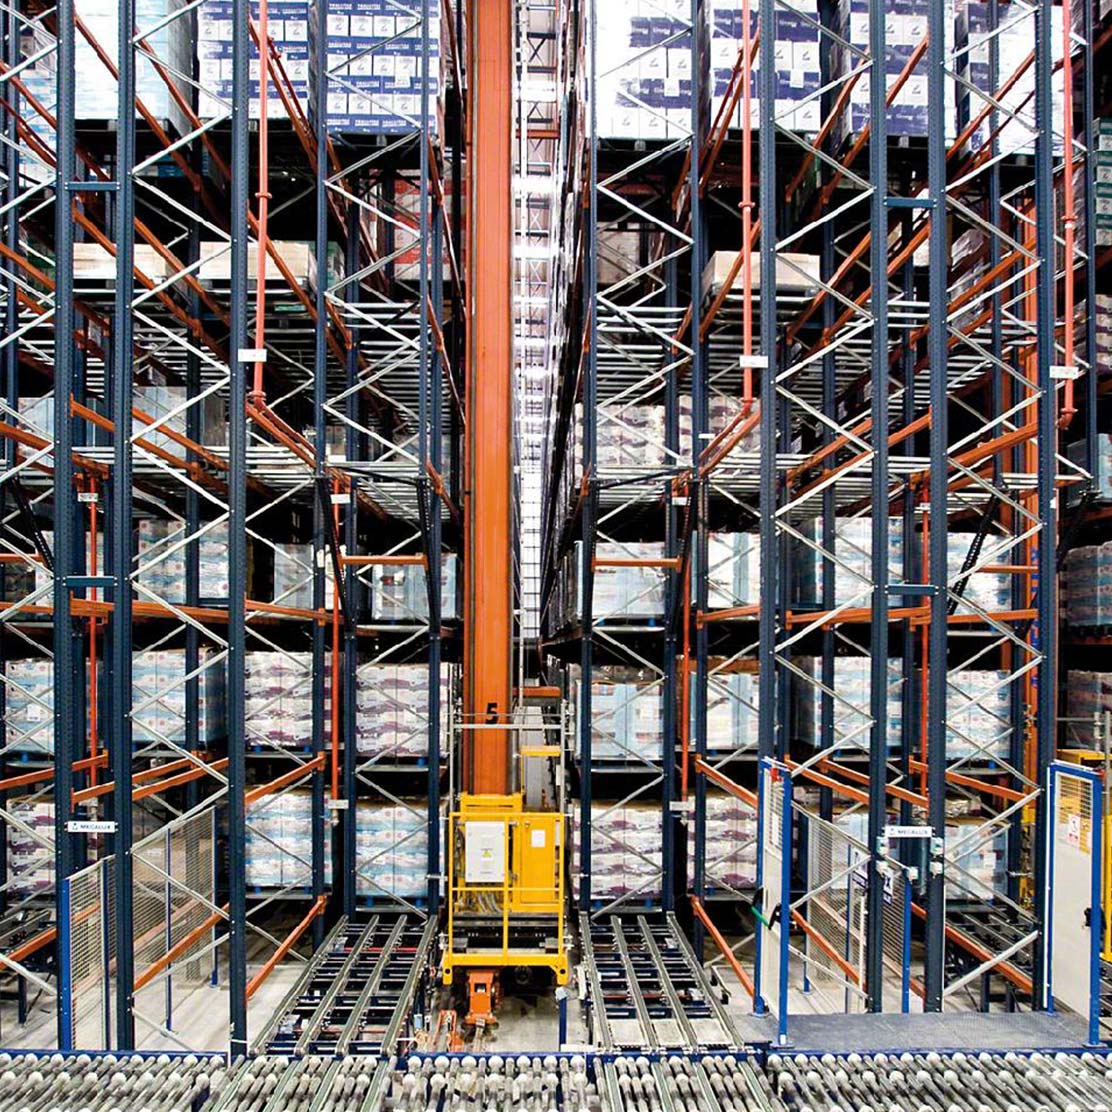 As demand for fulfillment increases with the recovering market, the use of flexible #automation and next-gen #technology is more important than ever. 

Learn more about our #AutomatedStorage and #RetrievalSystems: bit.ly/3zoaNJu. Via @modernmhmag.